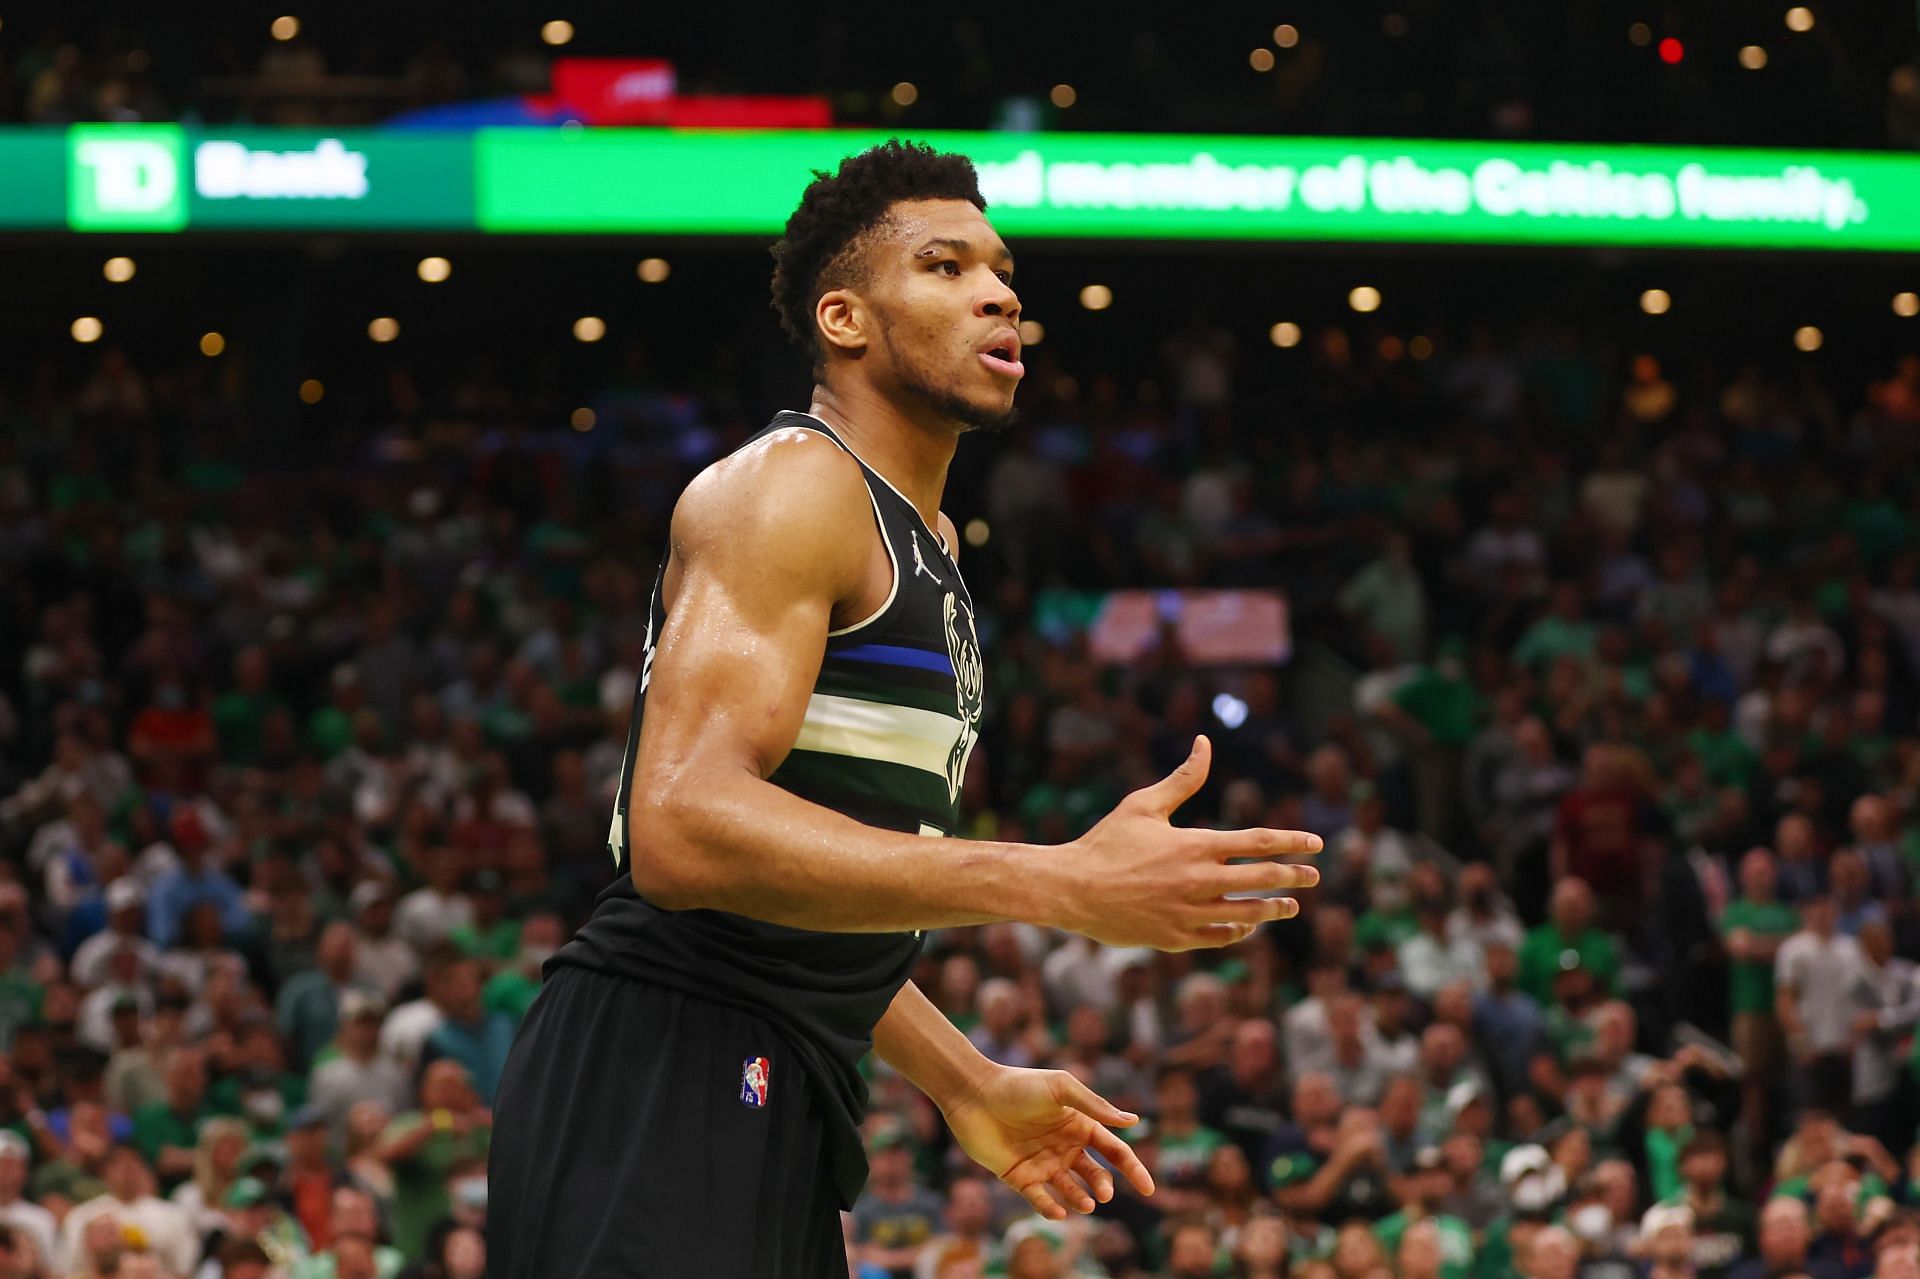 Giannis Antetokounmpo #34 of the Milwaukee Bucks reacts against the Boston Celtics during the fourth quarter in Game Seven of the 2022 NBA Playoffs Eastern Conference Semifinals at TD Garden on May 15, 2022 in Boston, Massachusetts.